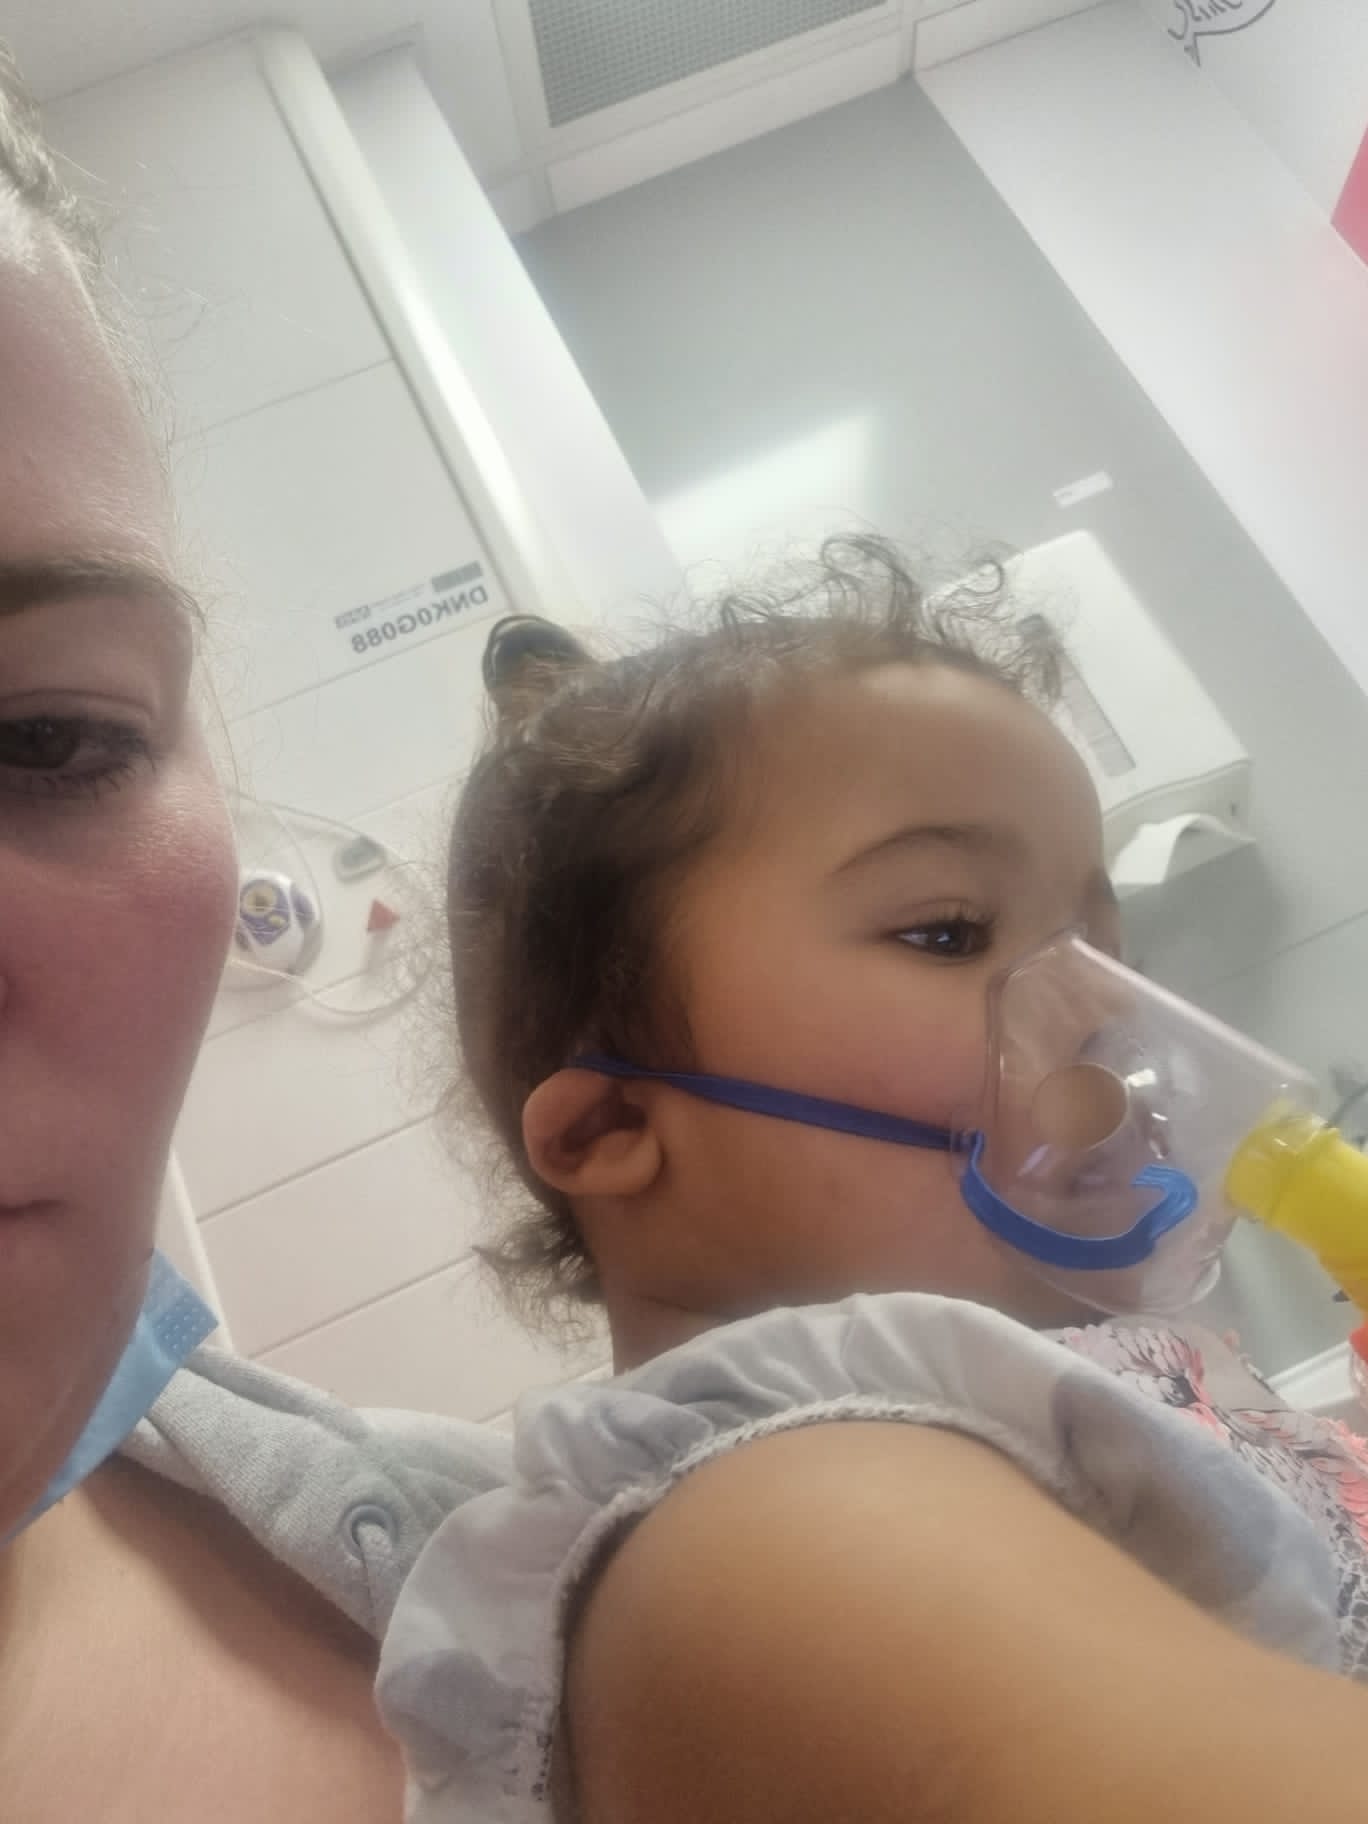 Sammie with her daughter Mckenzie when she was hospitalised